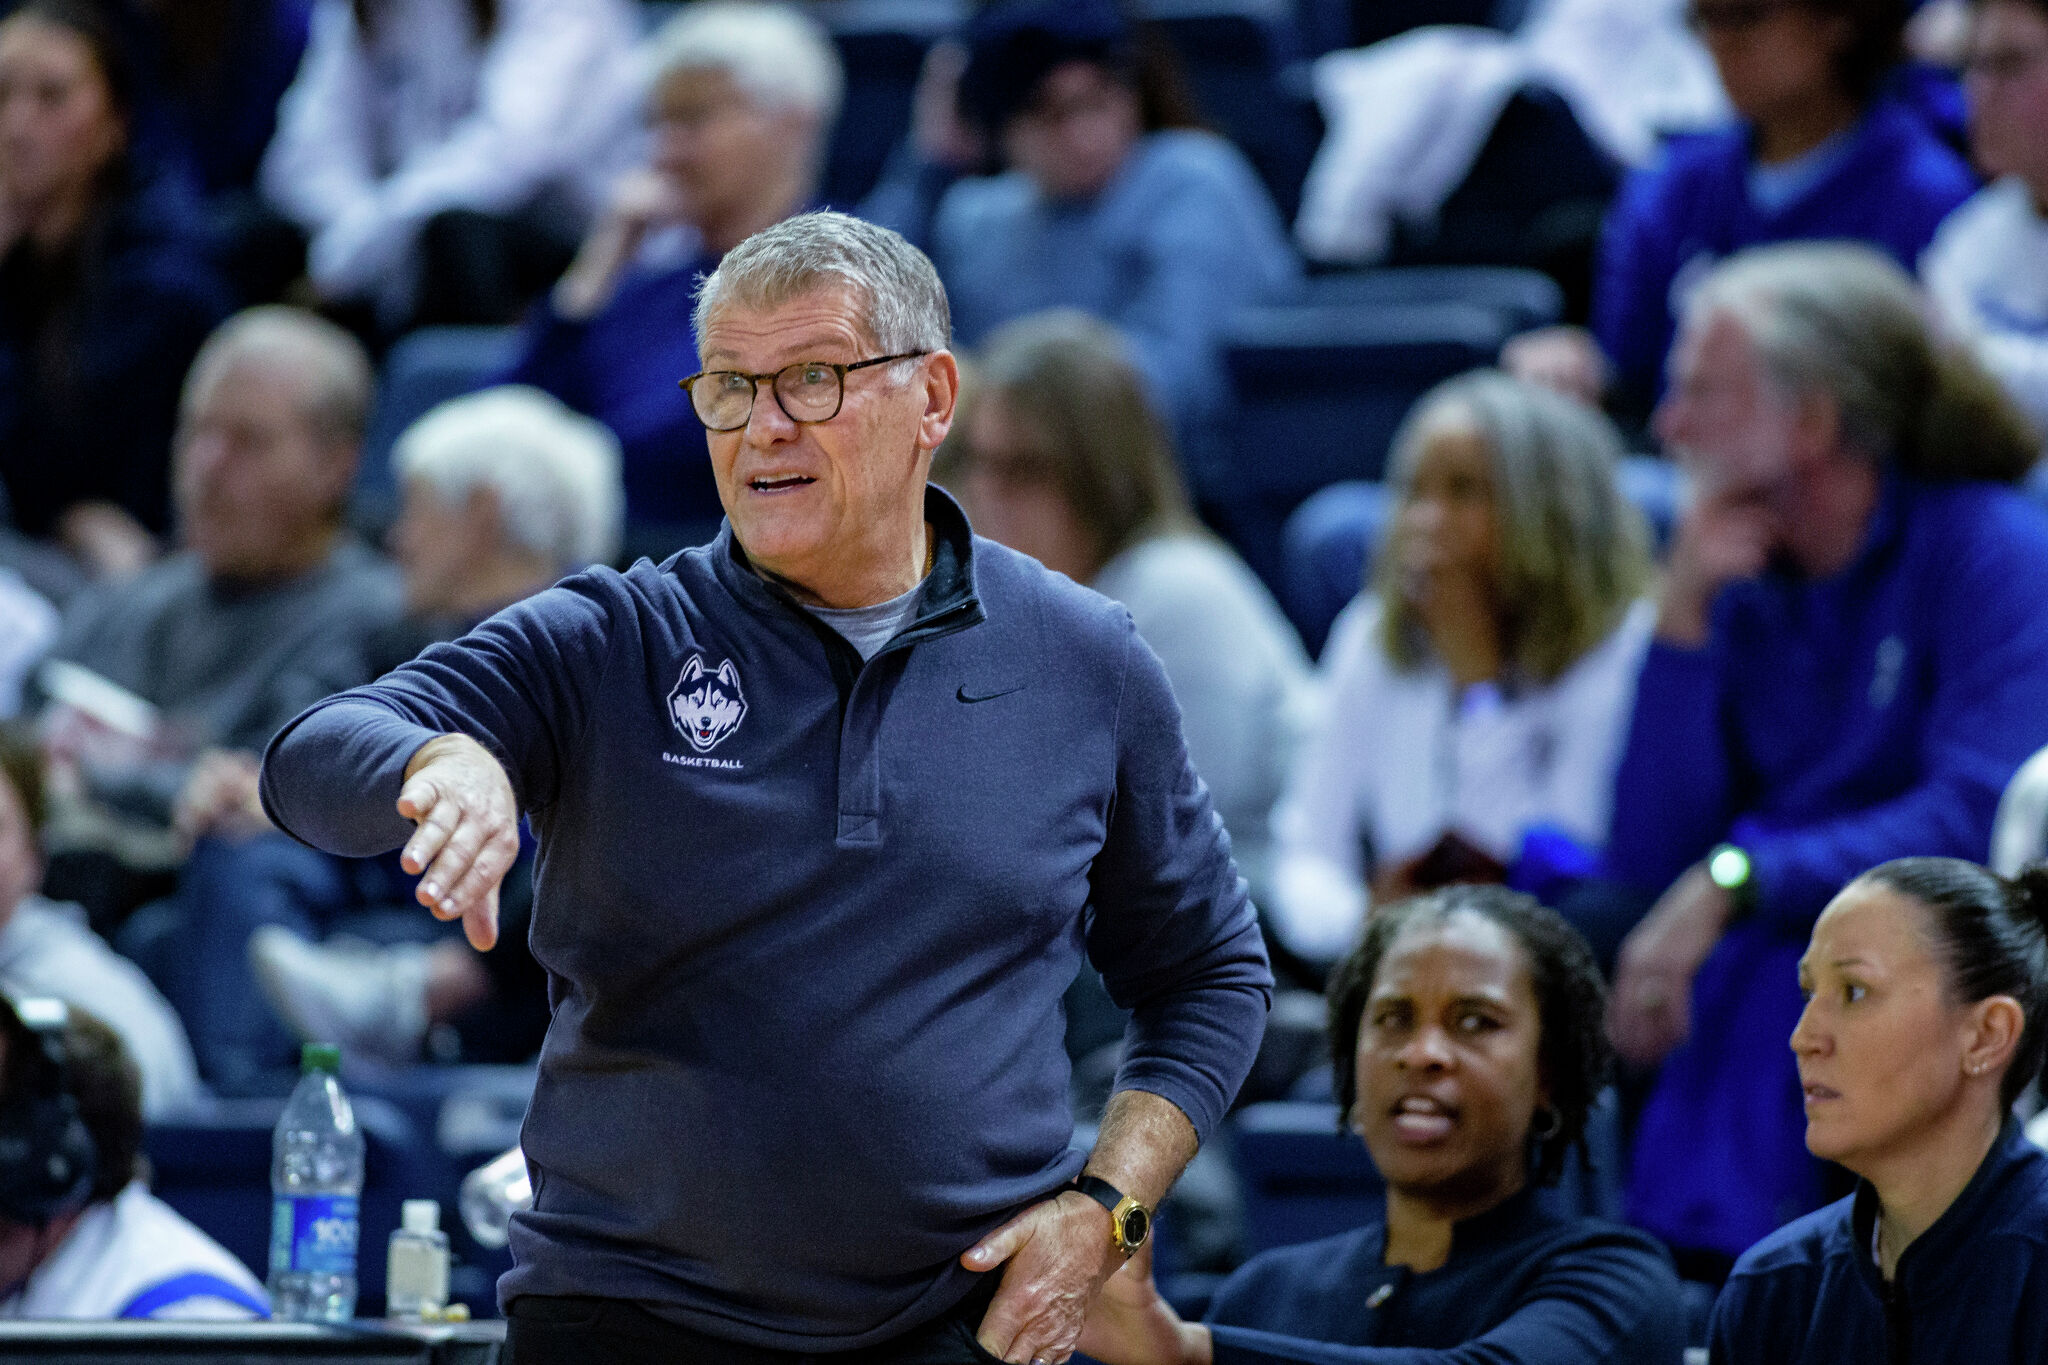 UConn coach Geno Auriemma returning after two-game absence